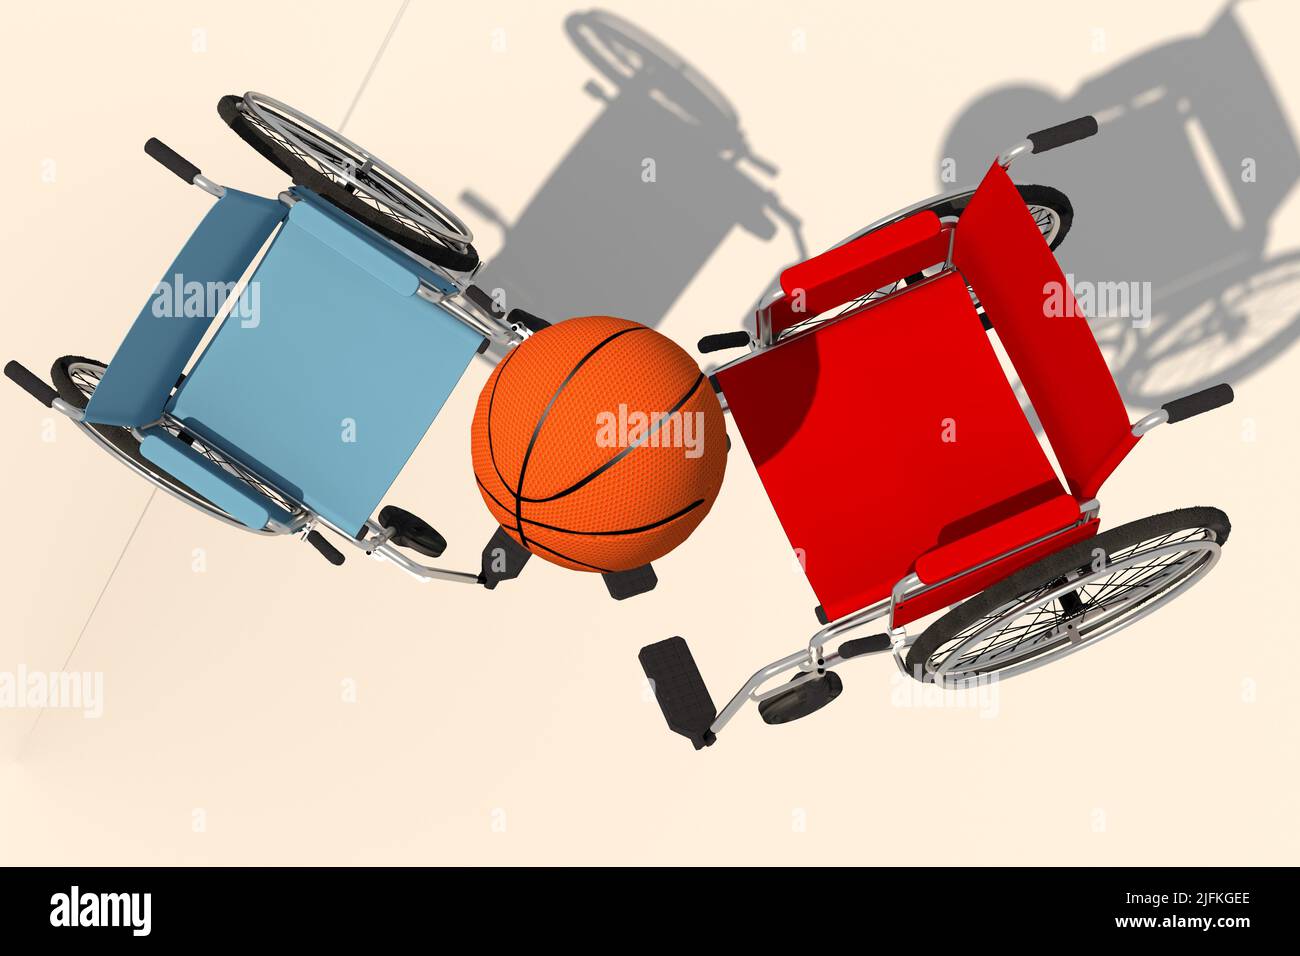 3D illustration of dispute over basket by handicapped people. Spirit of overcoming. Stock Photo